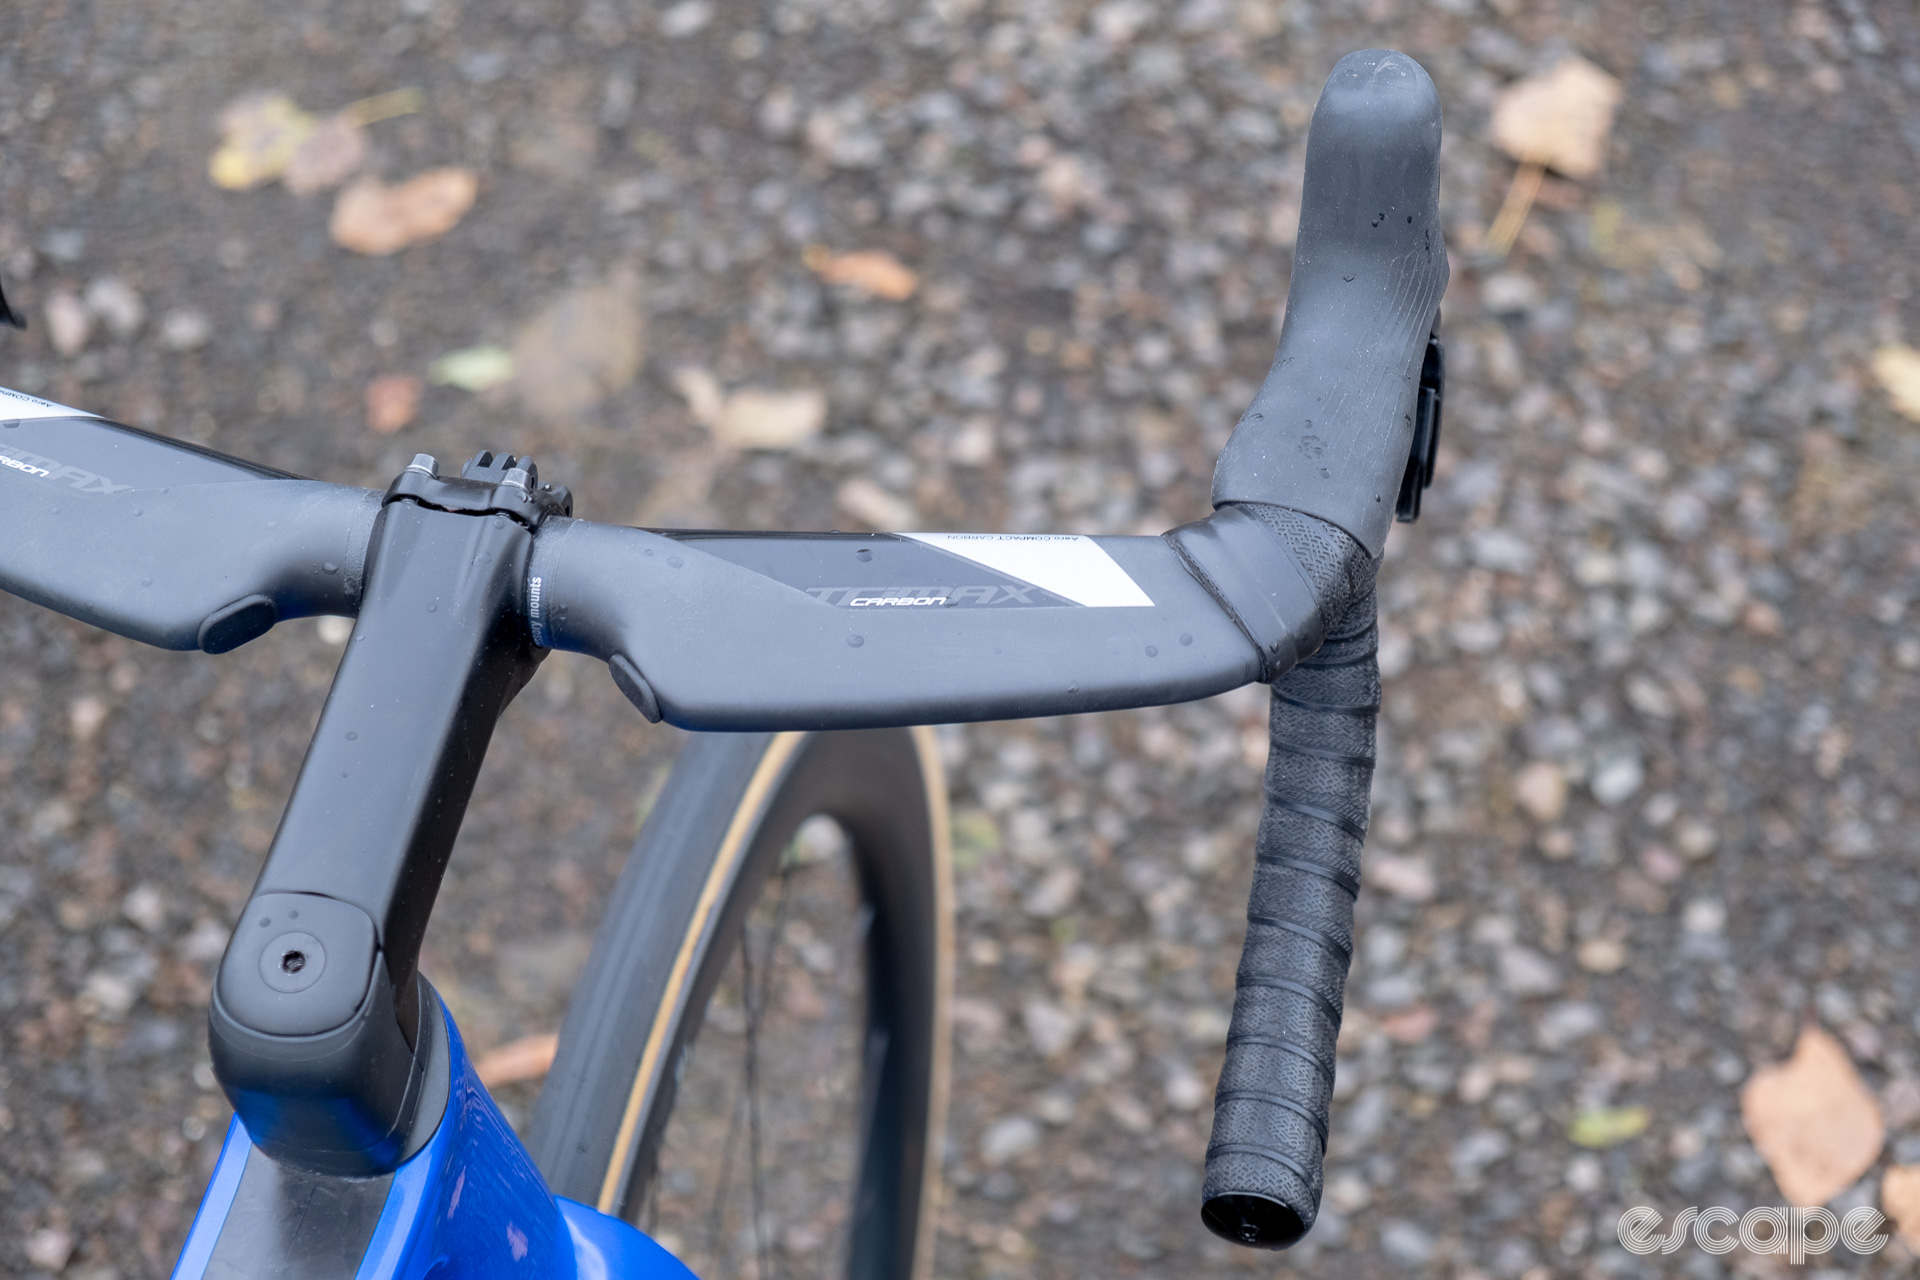 The photo shows the tops of the Vision Trimax Carbon Aero handlebar with the Conceal stem on a new Cannondale SuperSix Evo Hi-Mod 2.